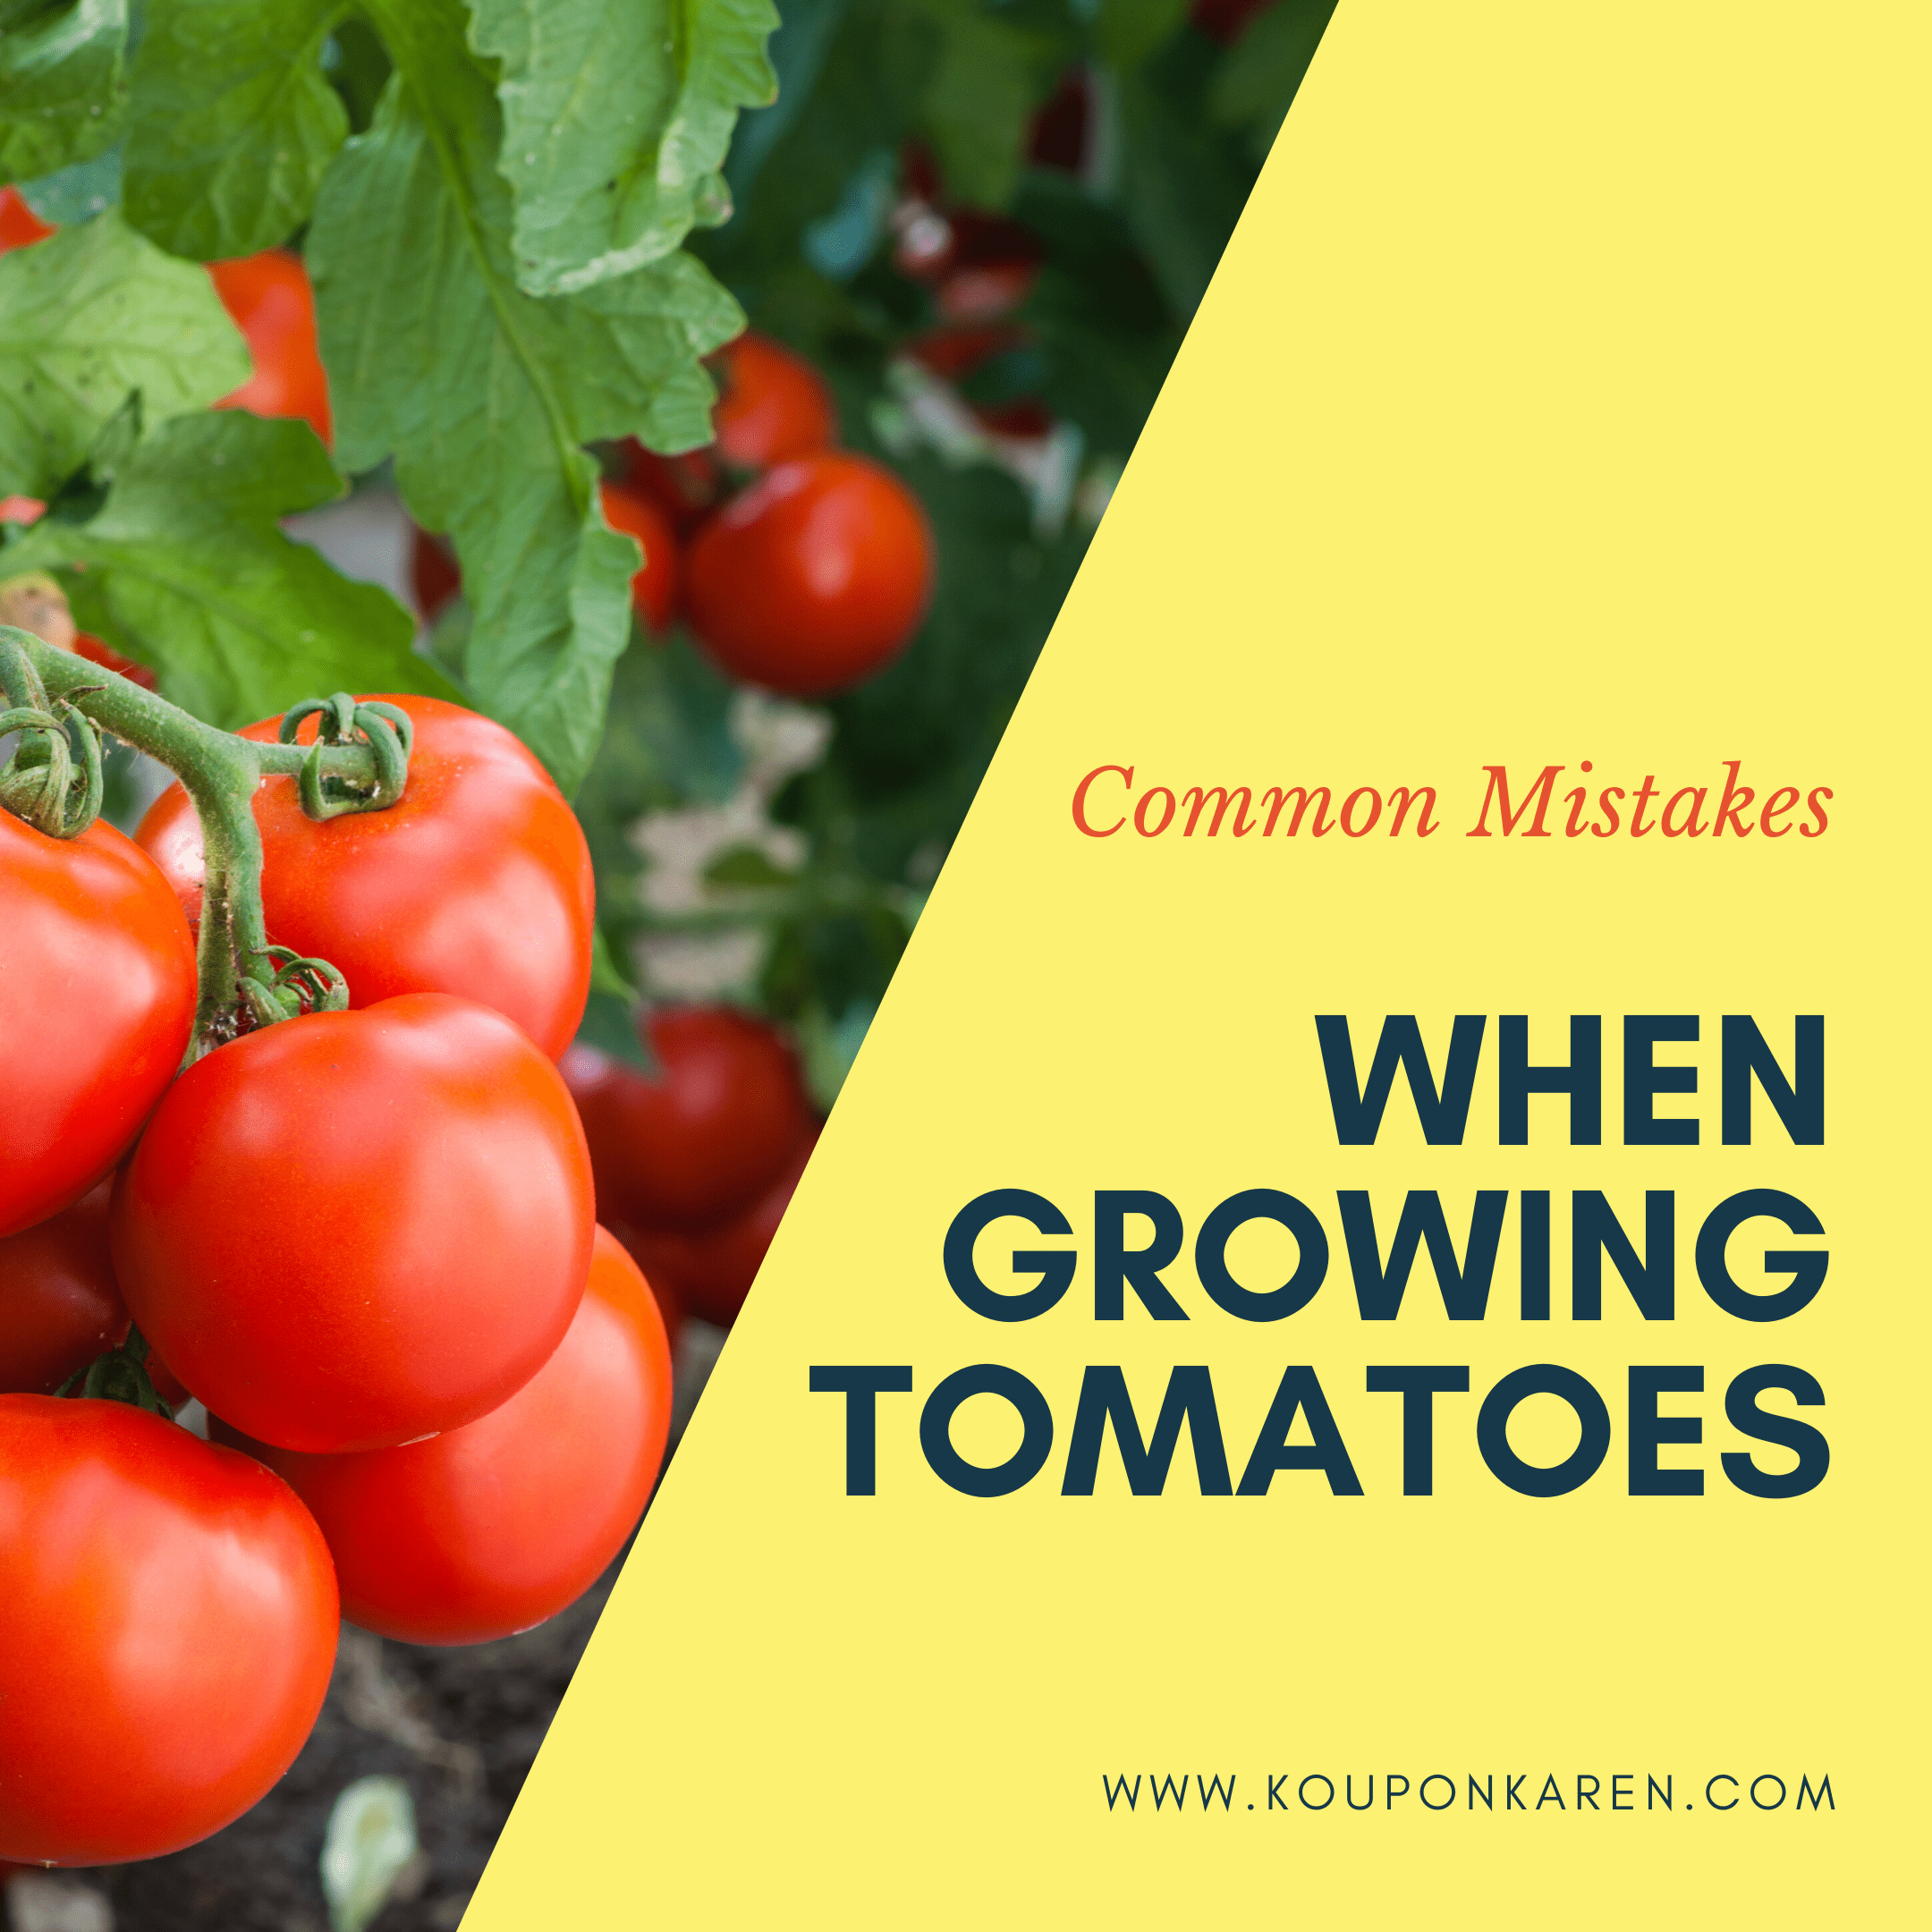 Common Mistakes When Growing Tomatoes